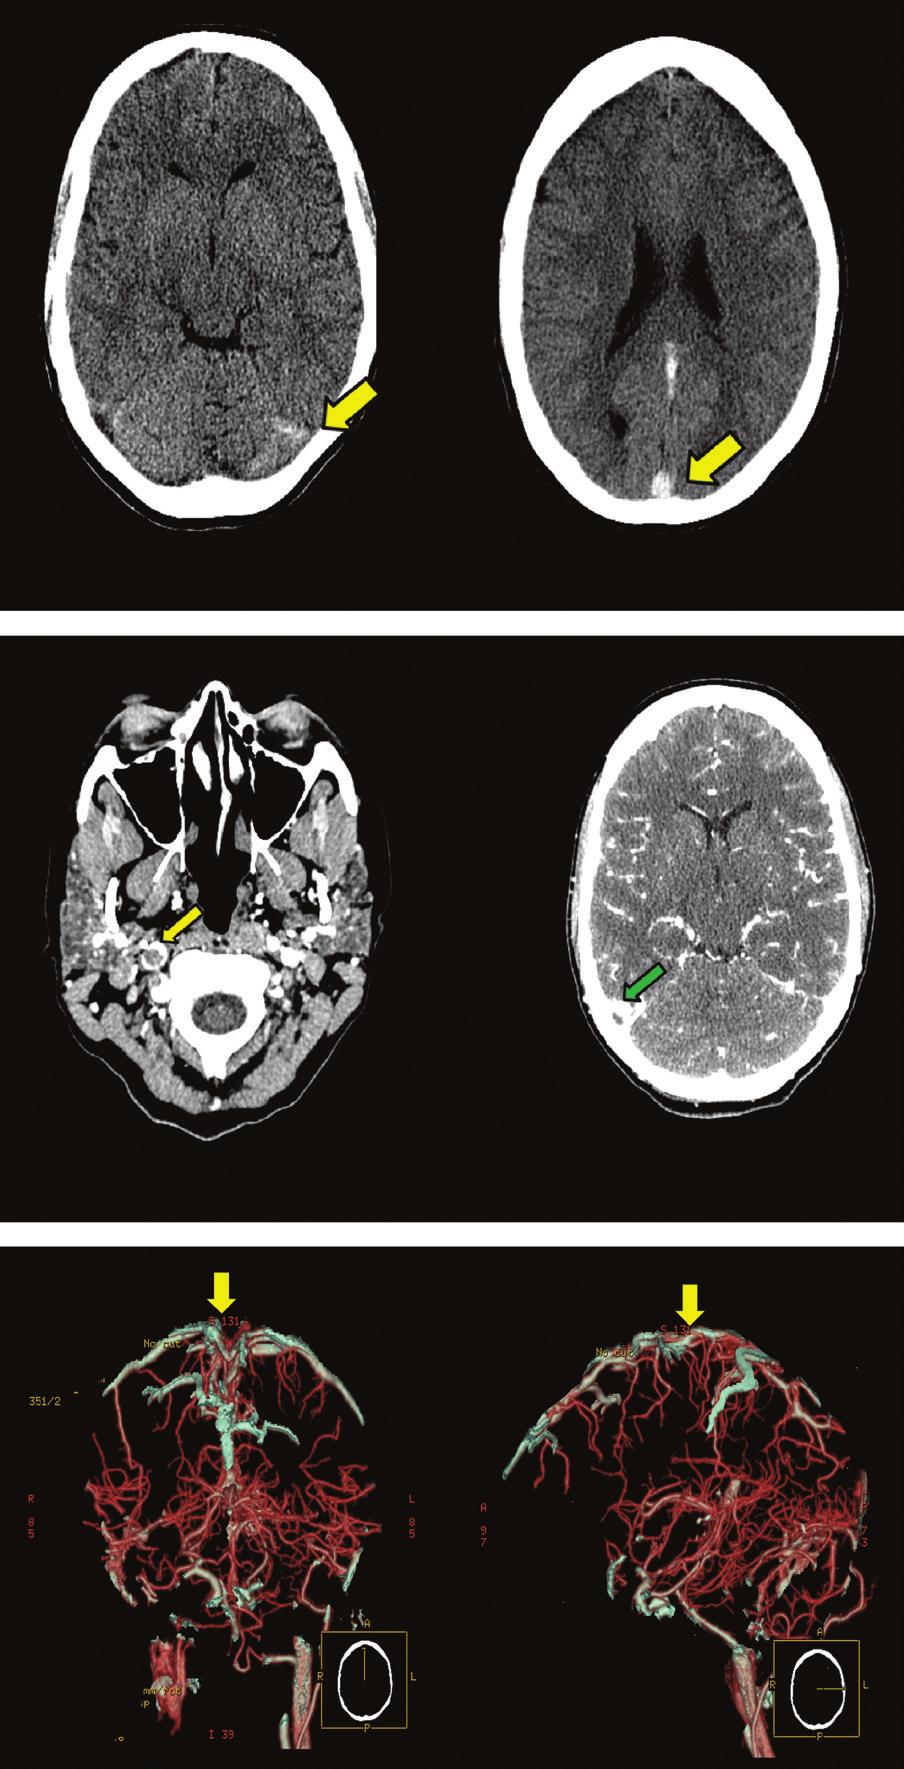 Cerebral Venous Thrombosis (AHA) and the European Federation of Neurological Societies (EFNS) guidelines recommend MRI/MRV as the preferred brain image, whereas CT/CT venogram is an acceptable option